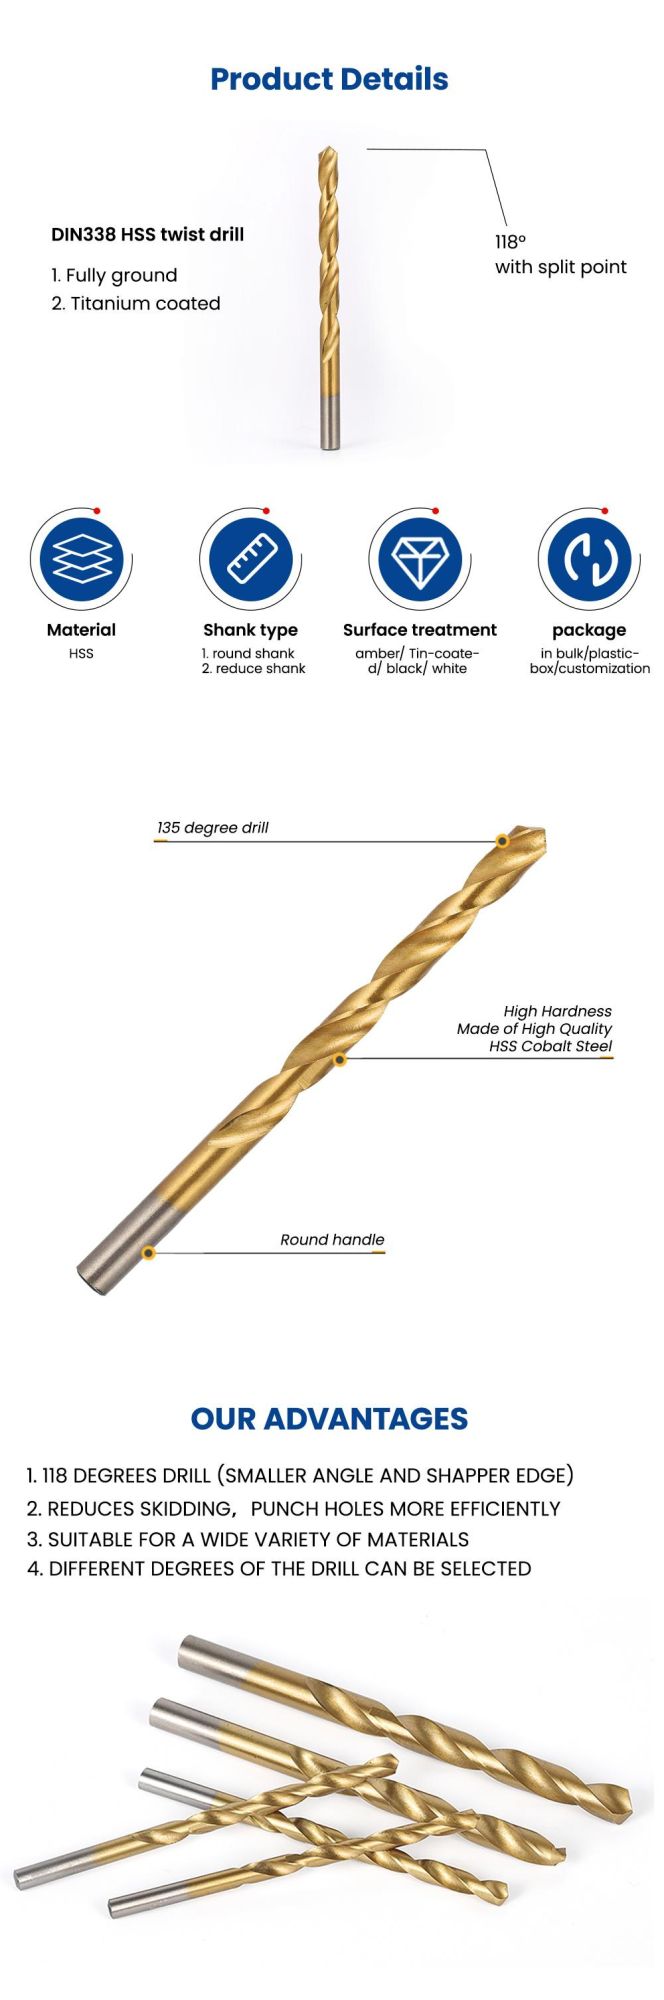 High Quality 5PCS 228mm/9" Extra Long Drill Bit Imperial 6/8/10/12/14mm Hex Shank Brad Point Augers Drill Bits